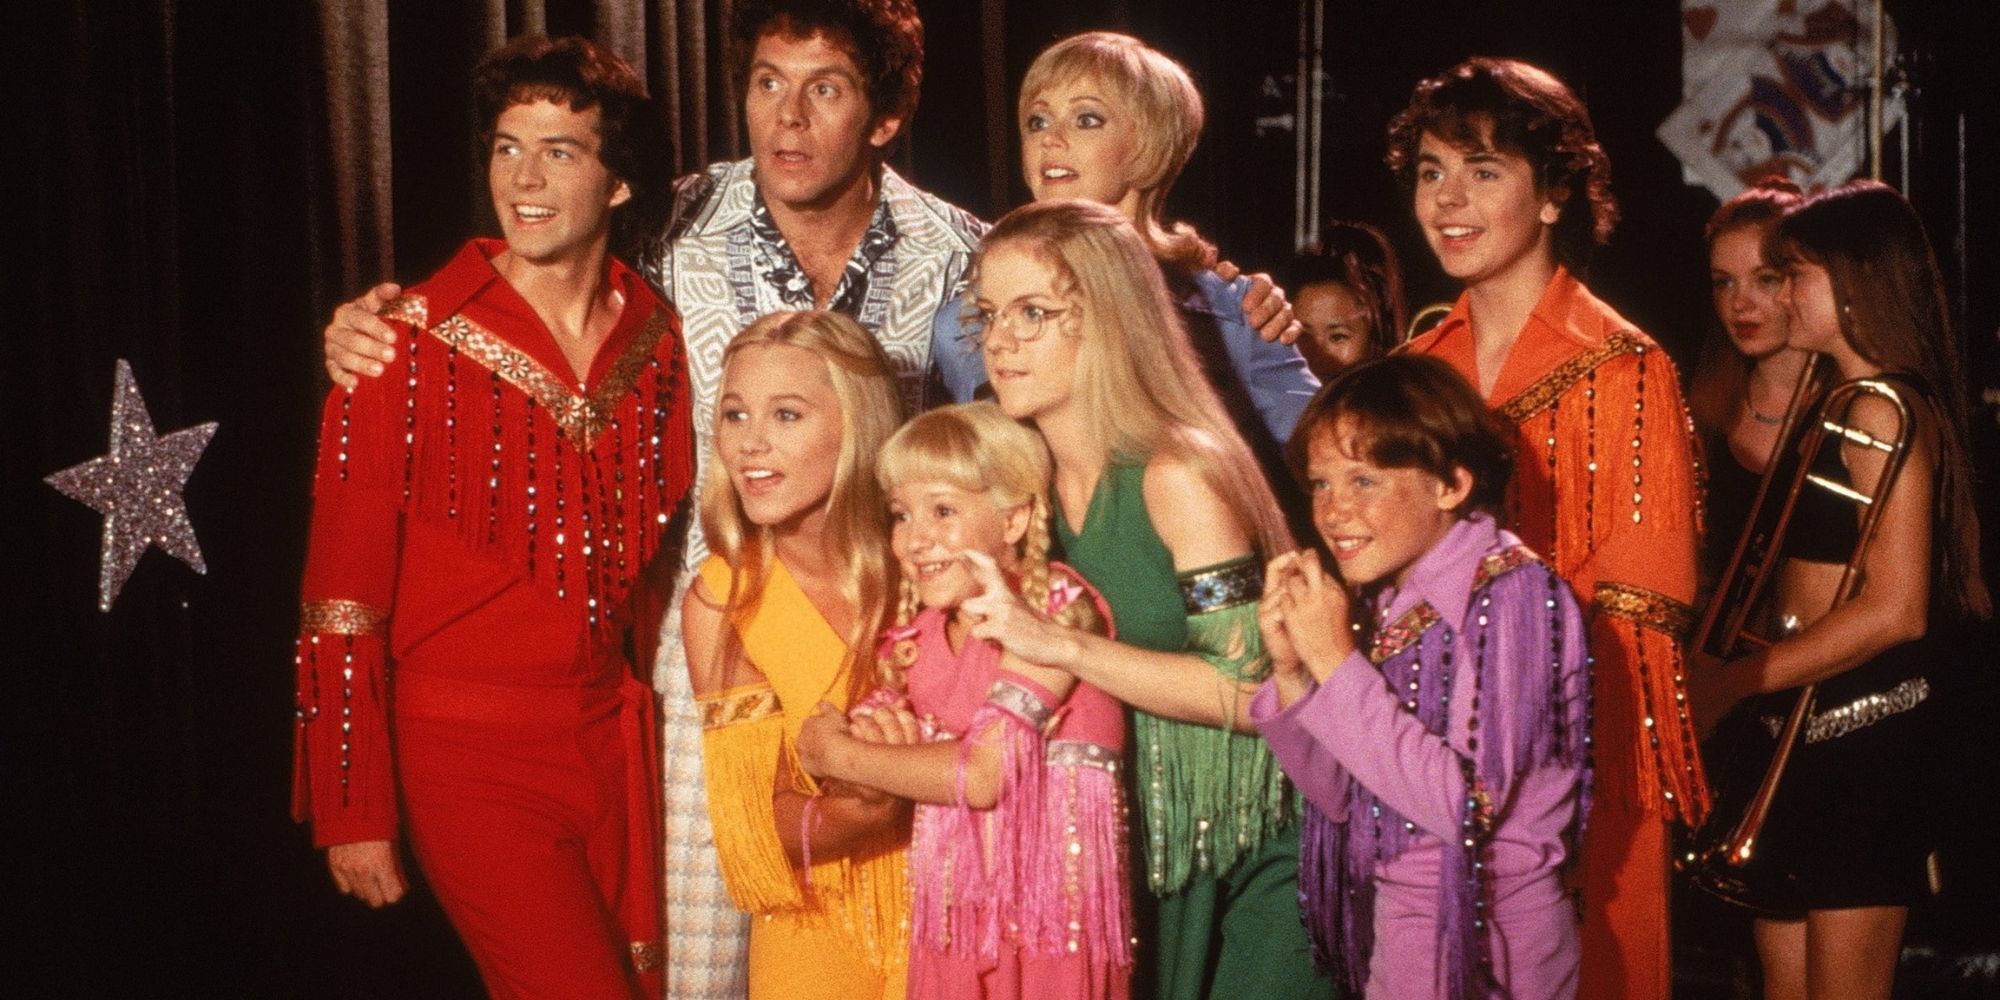 The cast of the Brady Bunch movie in 70s outfits